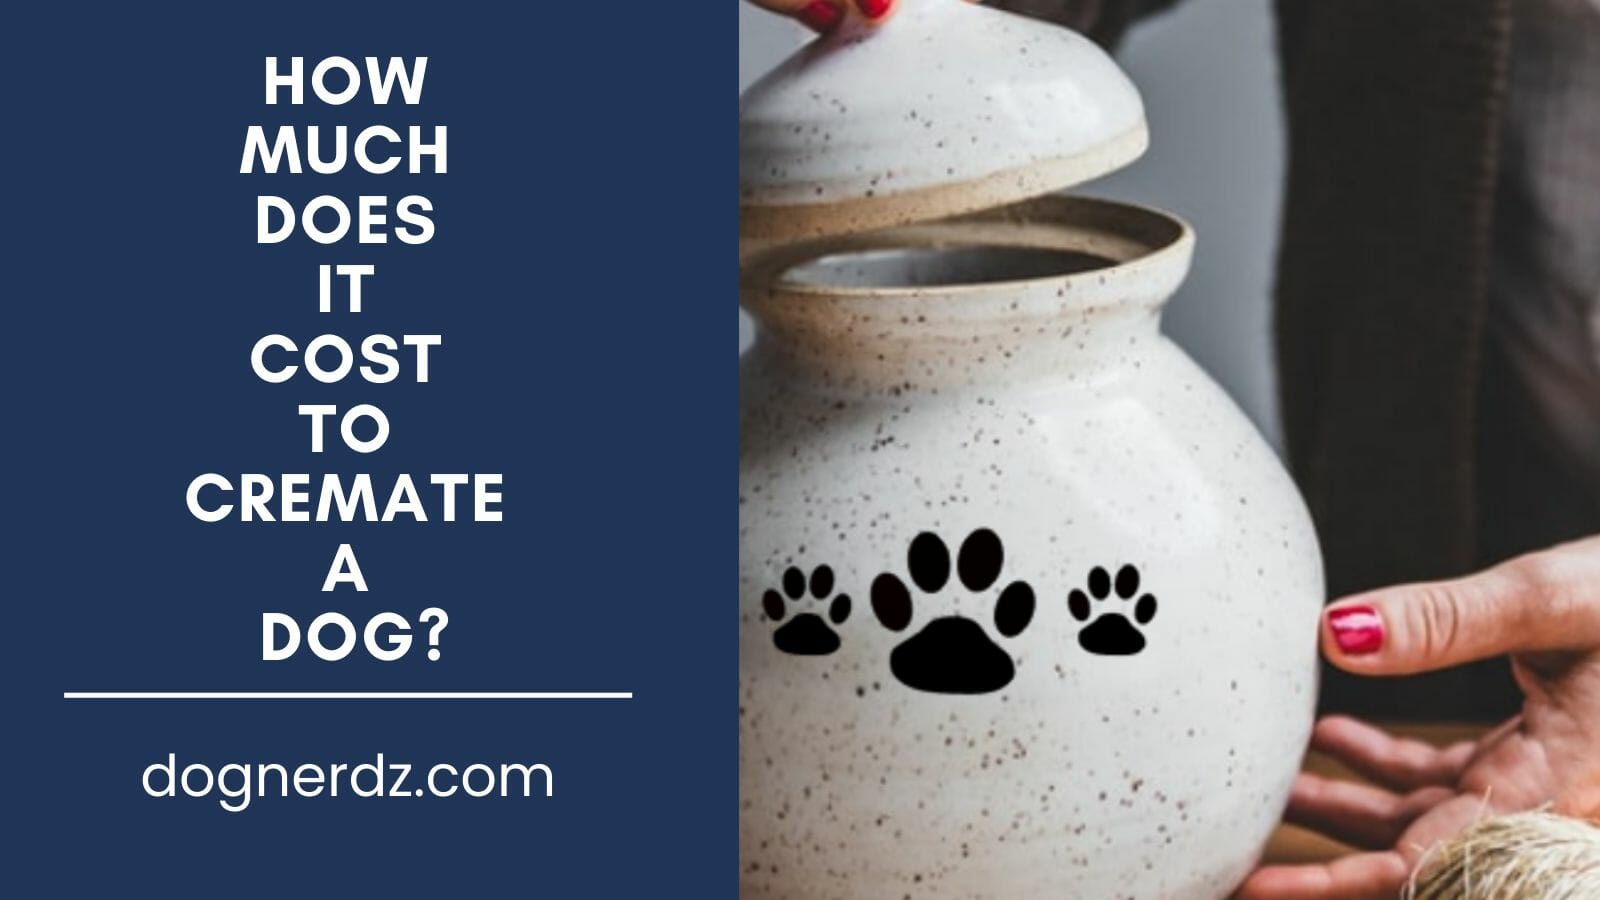 How Much Does It Cost to Cremate a Dog?